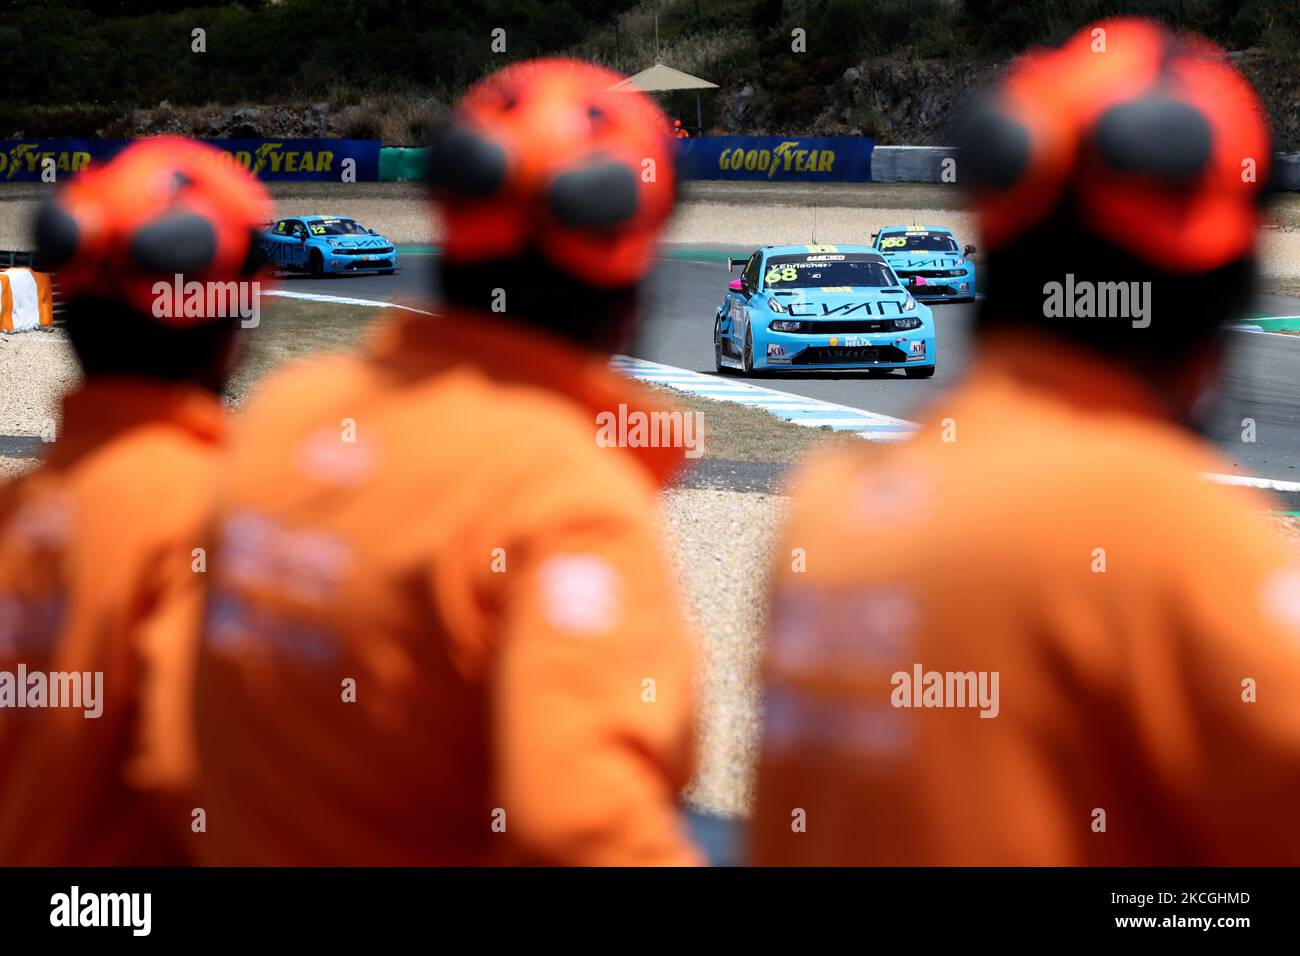 Yann Ehrlacher of France and Cyan Racing Lynk & Co Team (C ), Yvan Muller of France and Cyan Racing Lynk & Co Team (R ) and Santiago Urrutia of Argentina and Cyan Racing Lynk & Co Team (L) compete during the Race 1 of the FIA 2021 World Touring Car Cup Race of Portugal, at the Circuito Estoril in Cascais, Portugal on June 27, 2021. (Photo by Pedro FiÃºza/NurPhoto) Stock Photo